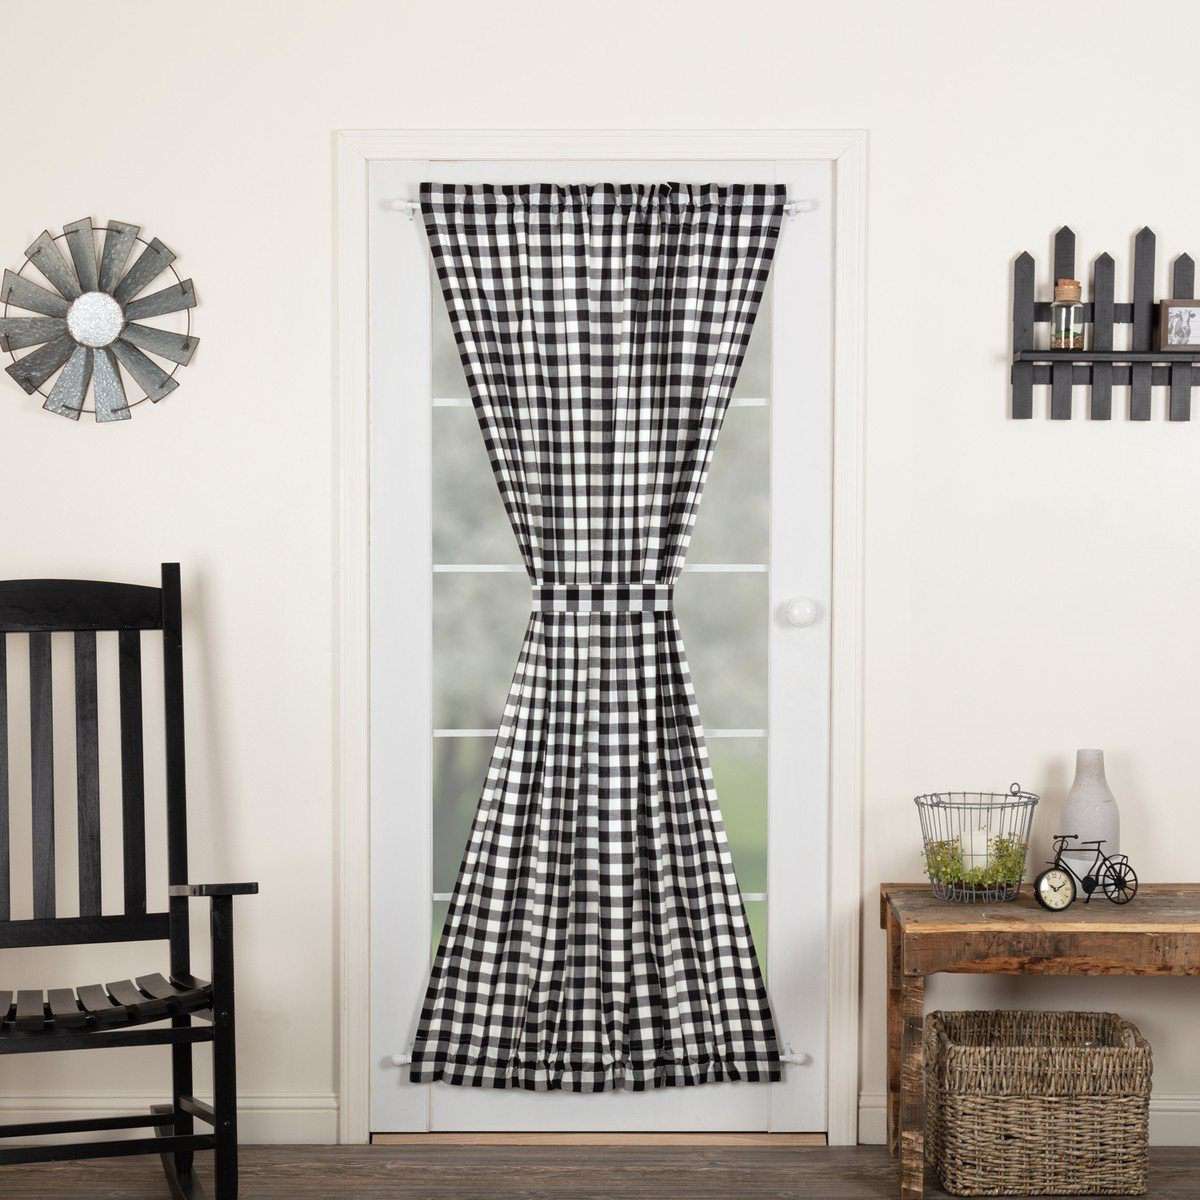 Annie Buffalo Black/Grey/Red/Tan Check Door Panel 72x40 curtain VHC Brands 